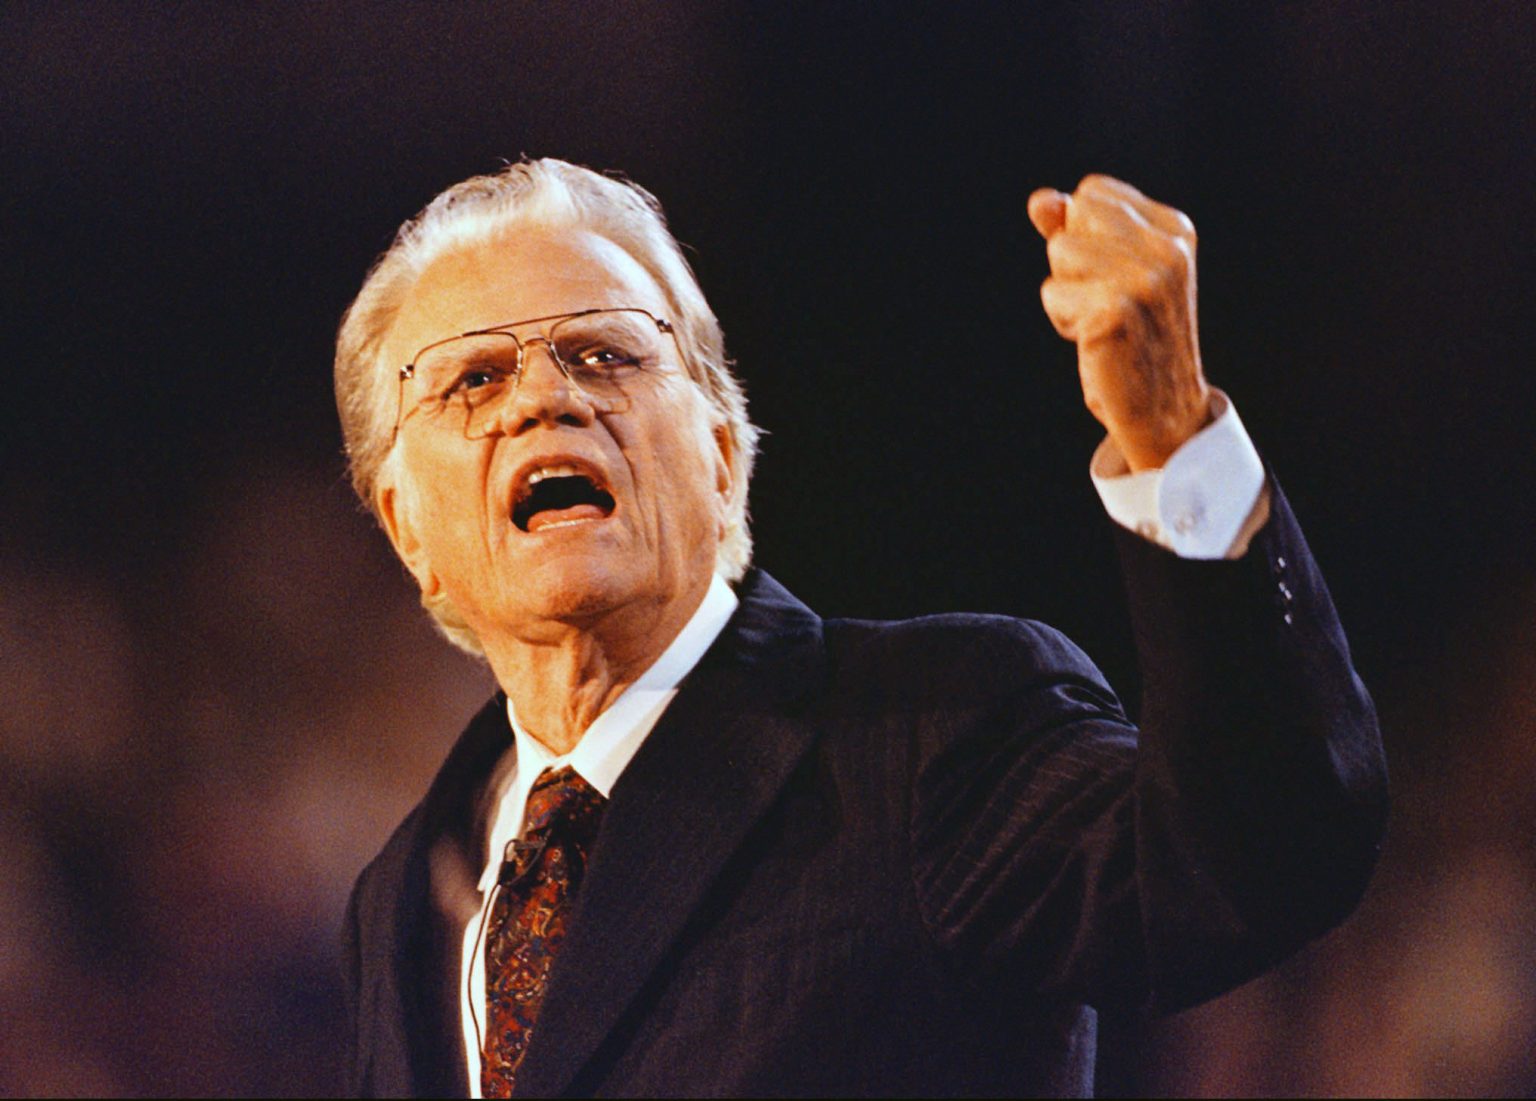 DOWNLOAD MP3: The Family by Evangelist BILLY GRAHAM (Sermon) 1